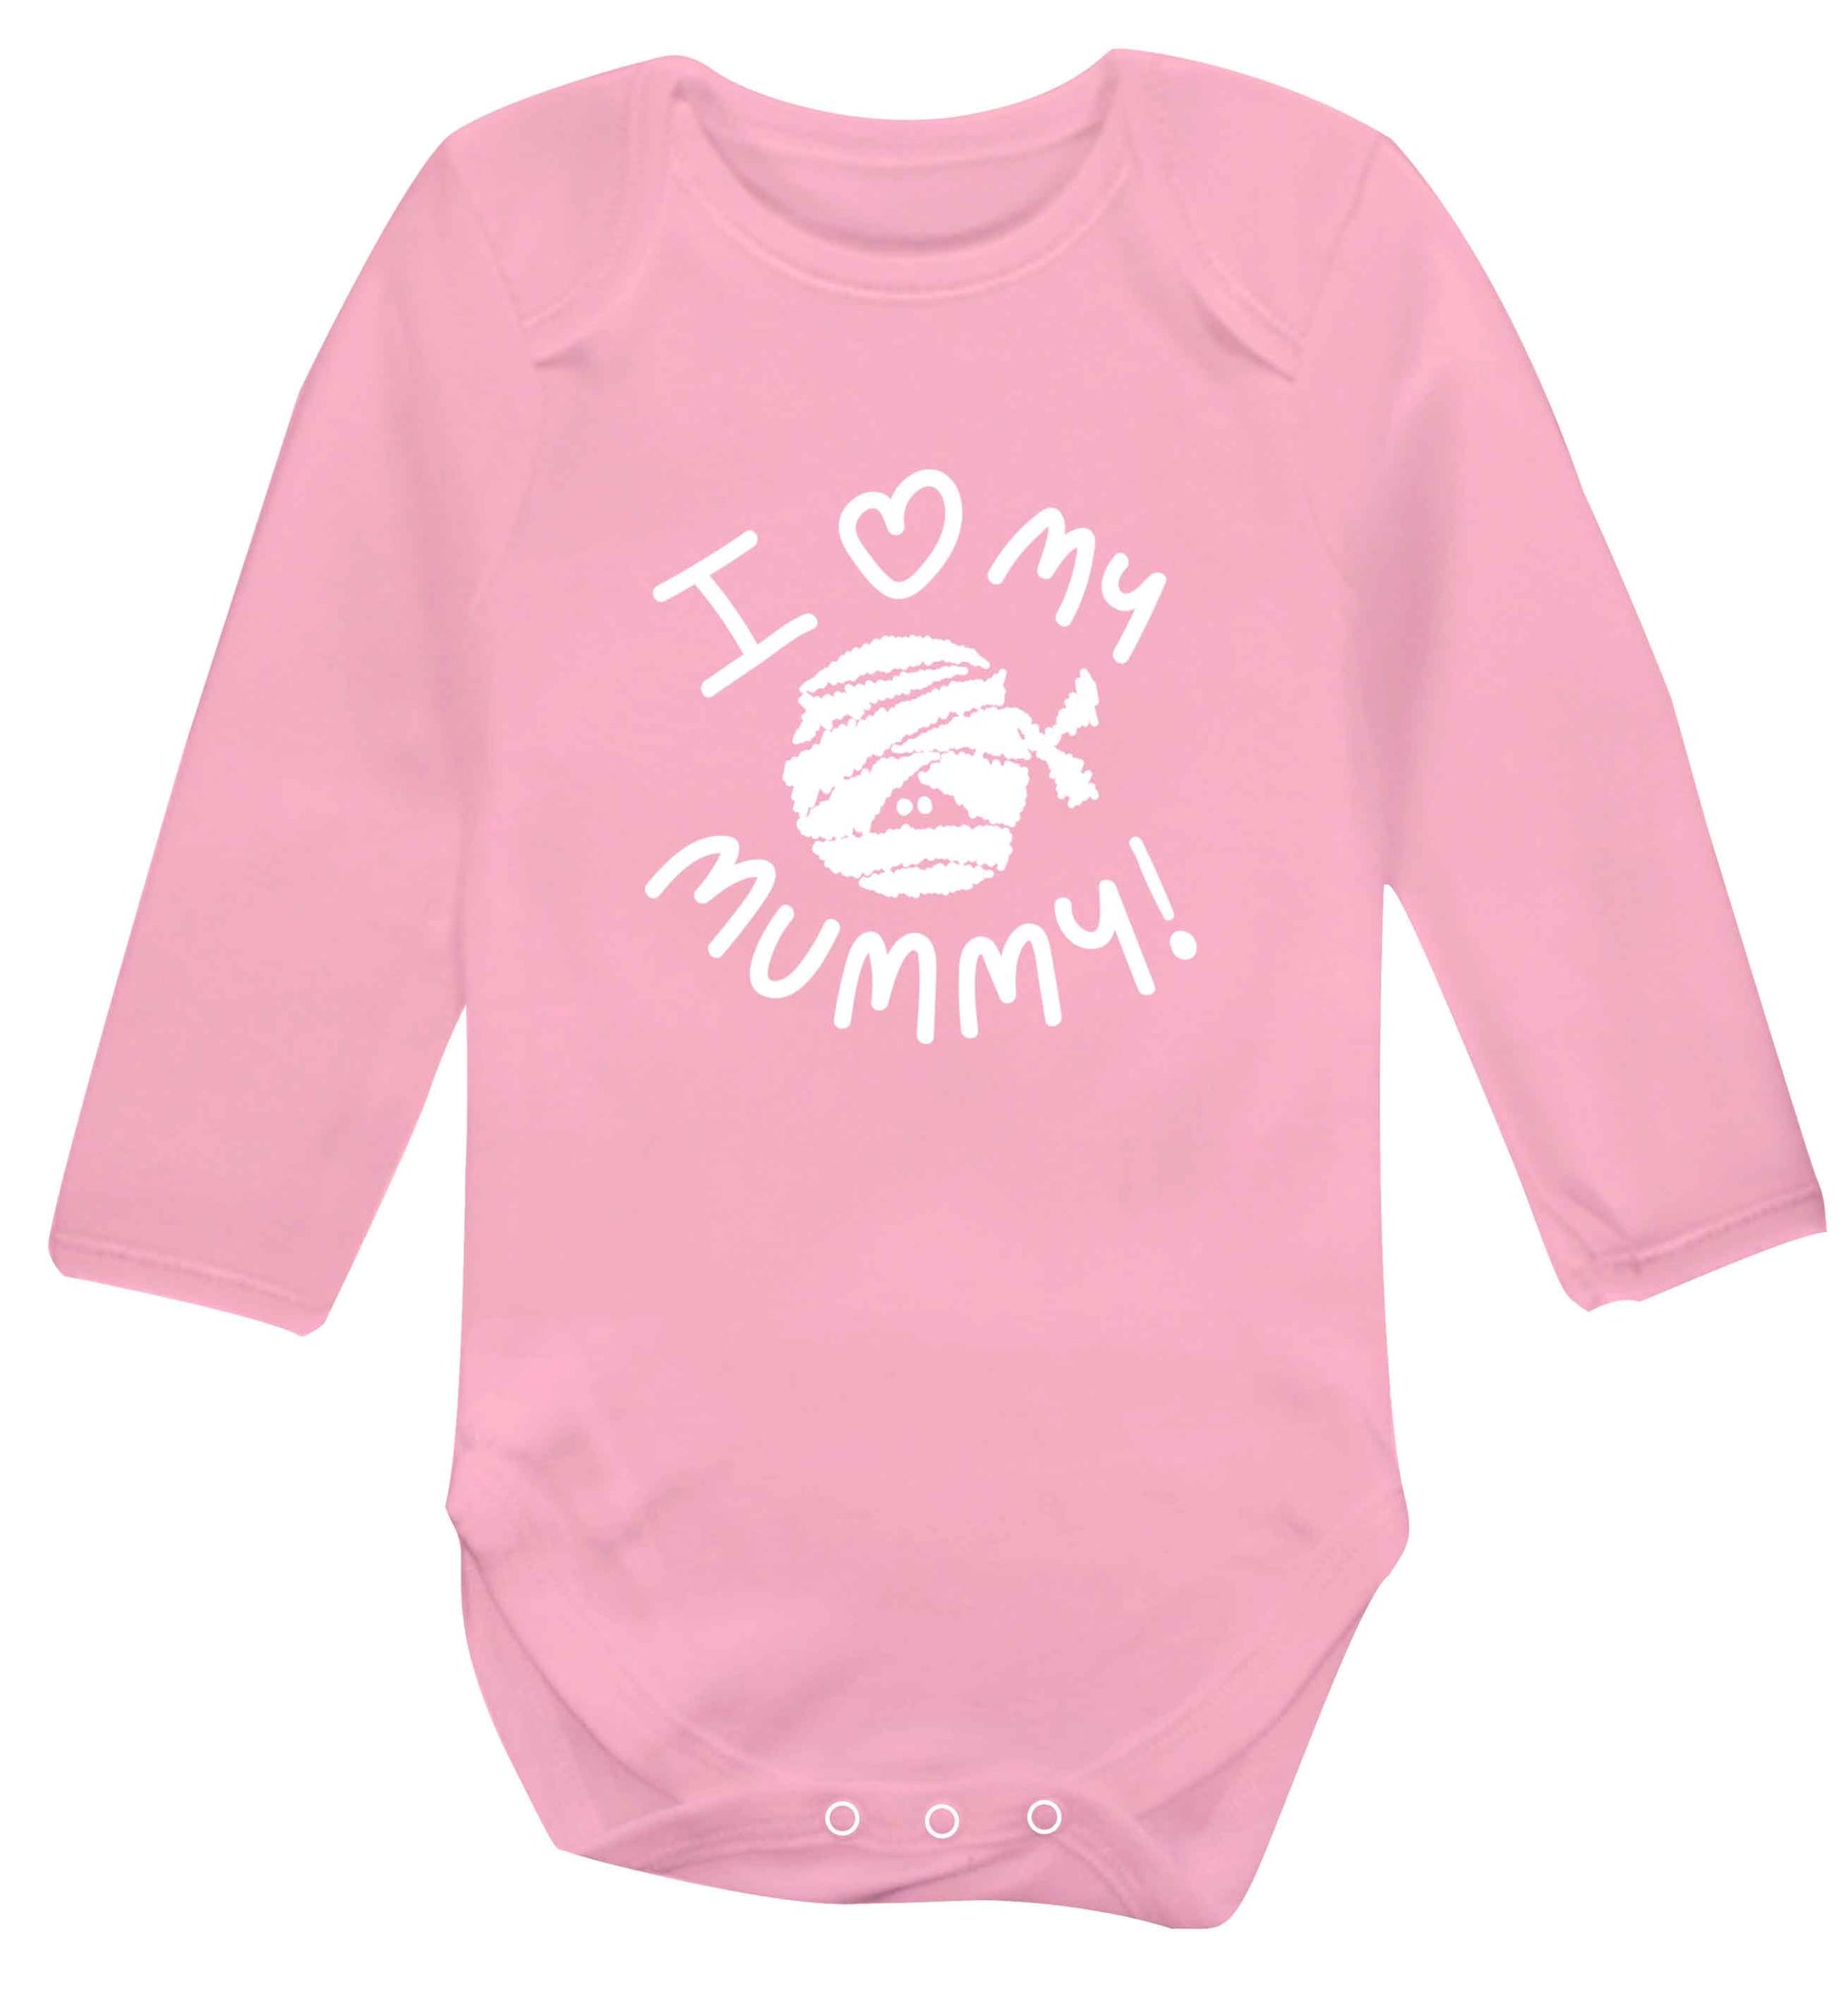 I love my mummy halloween pun baby vest long sleeved pale pink 6-12 months